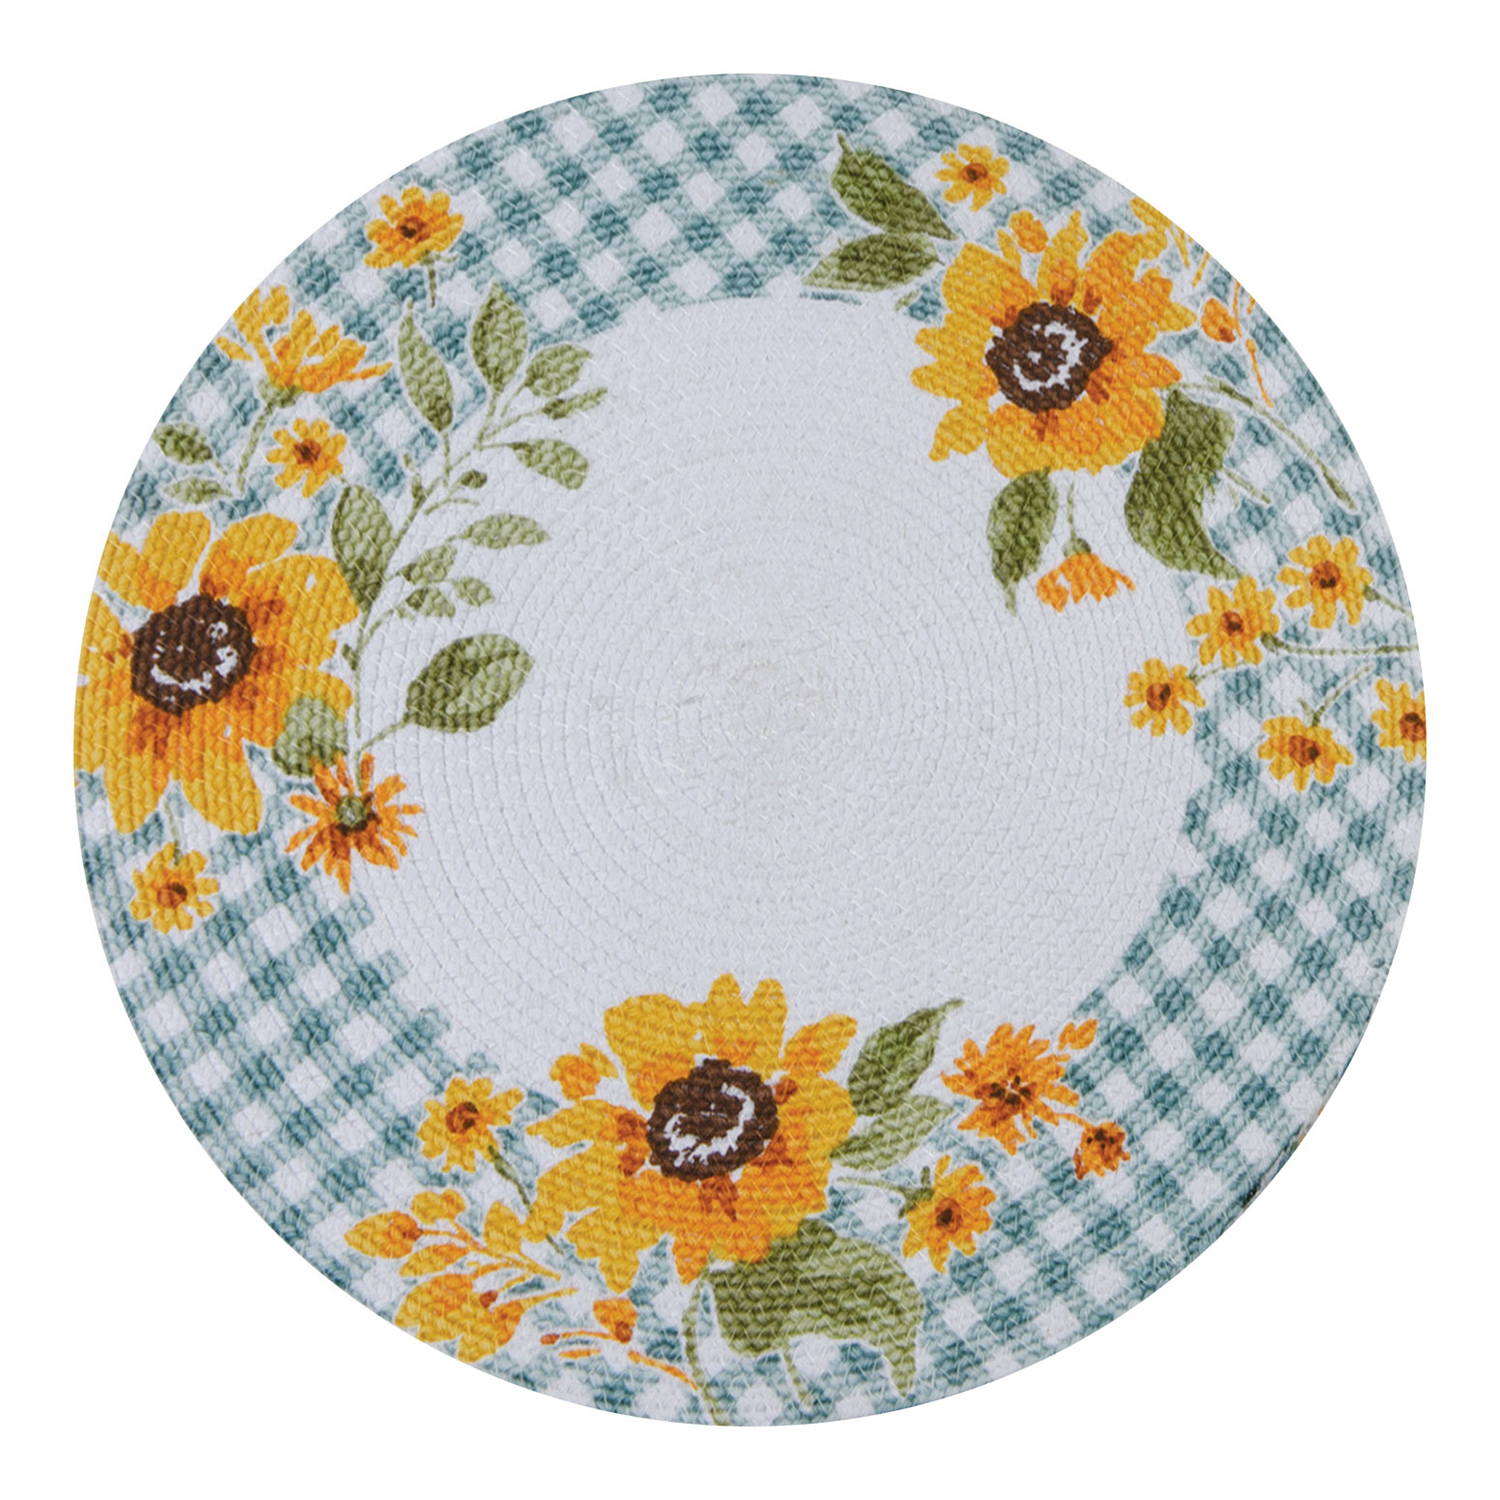 Kay Dee Sunflowers Forever Blue Plaid Kitchen or Dining Braided Placemats Set of 4